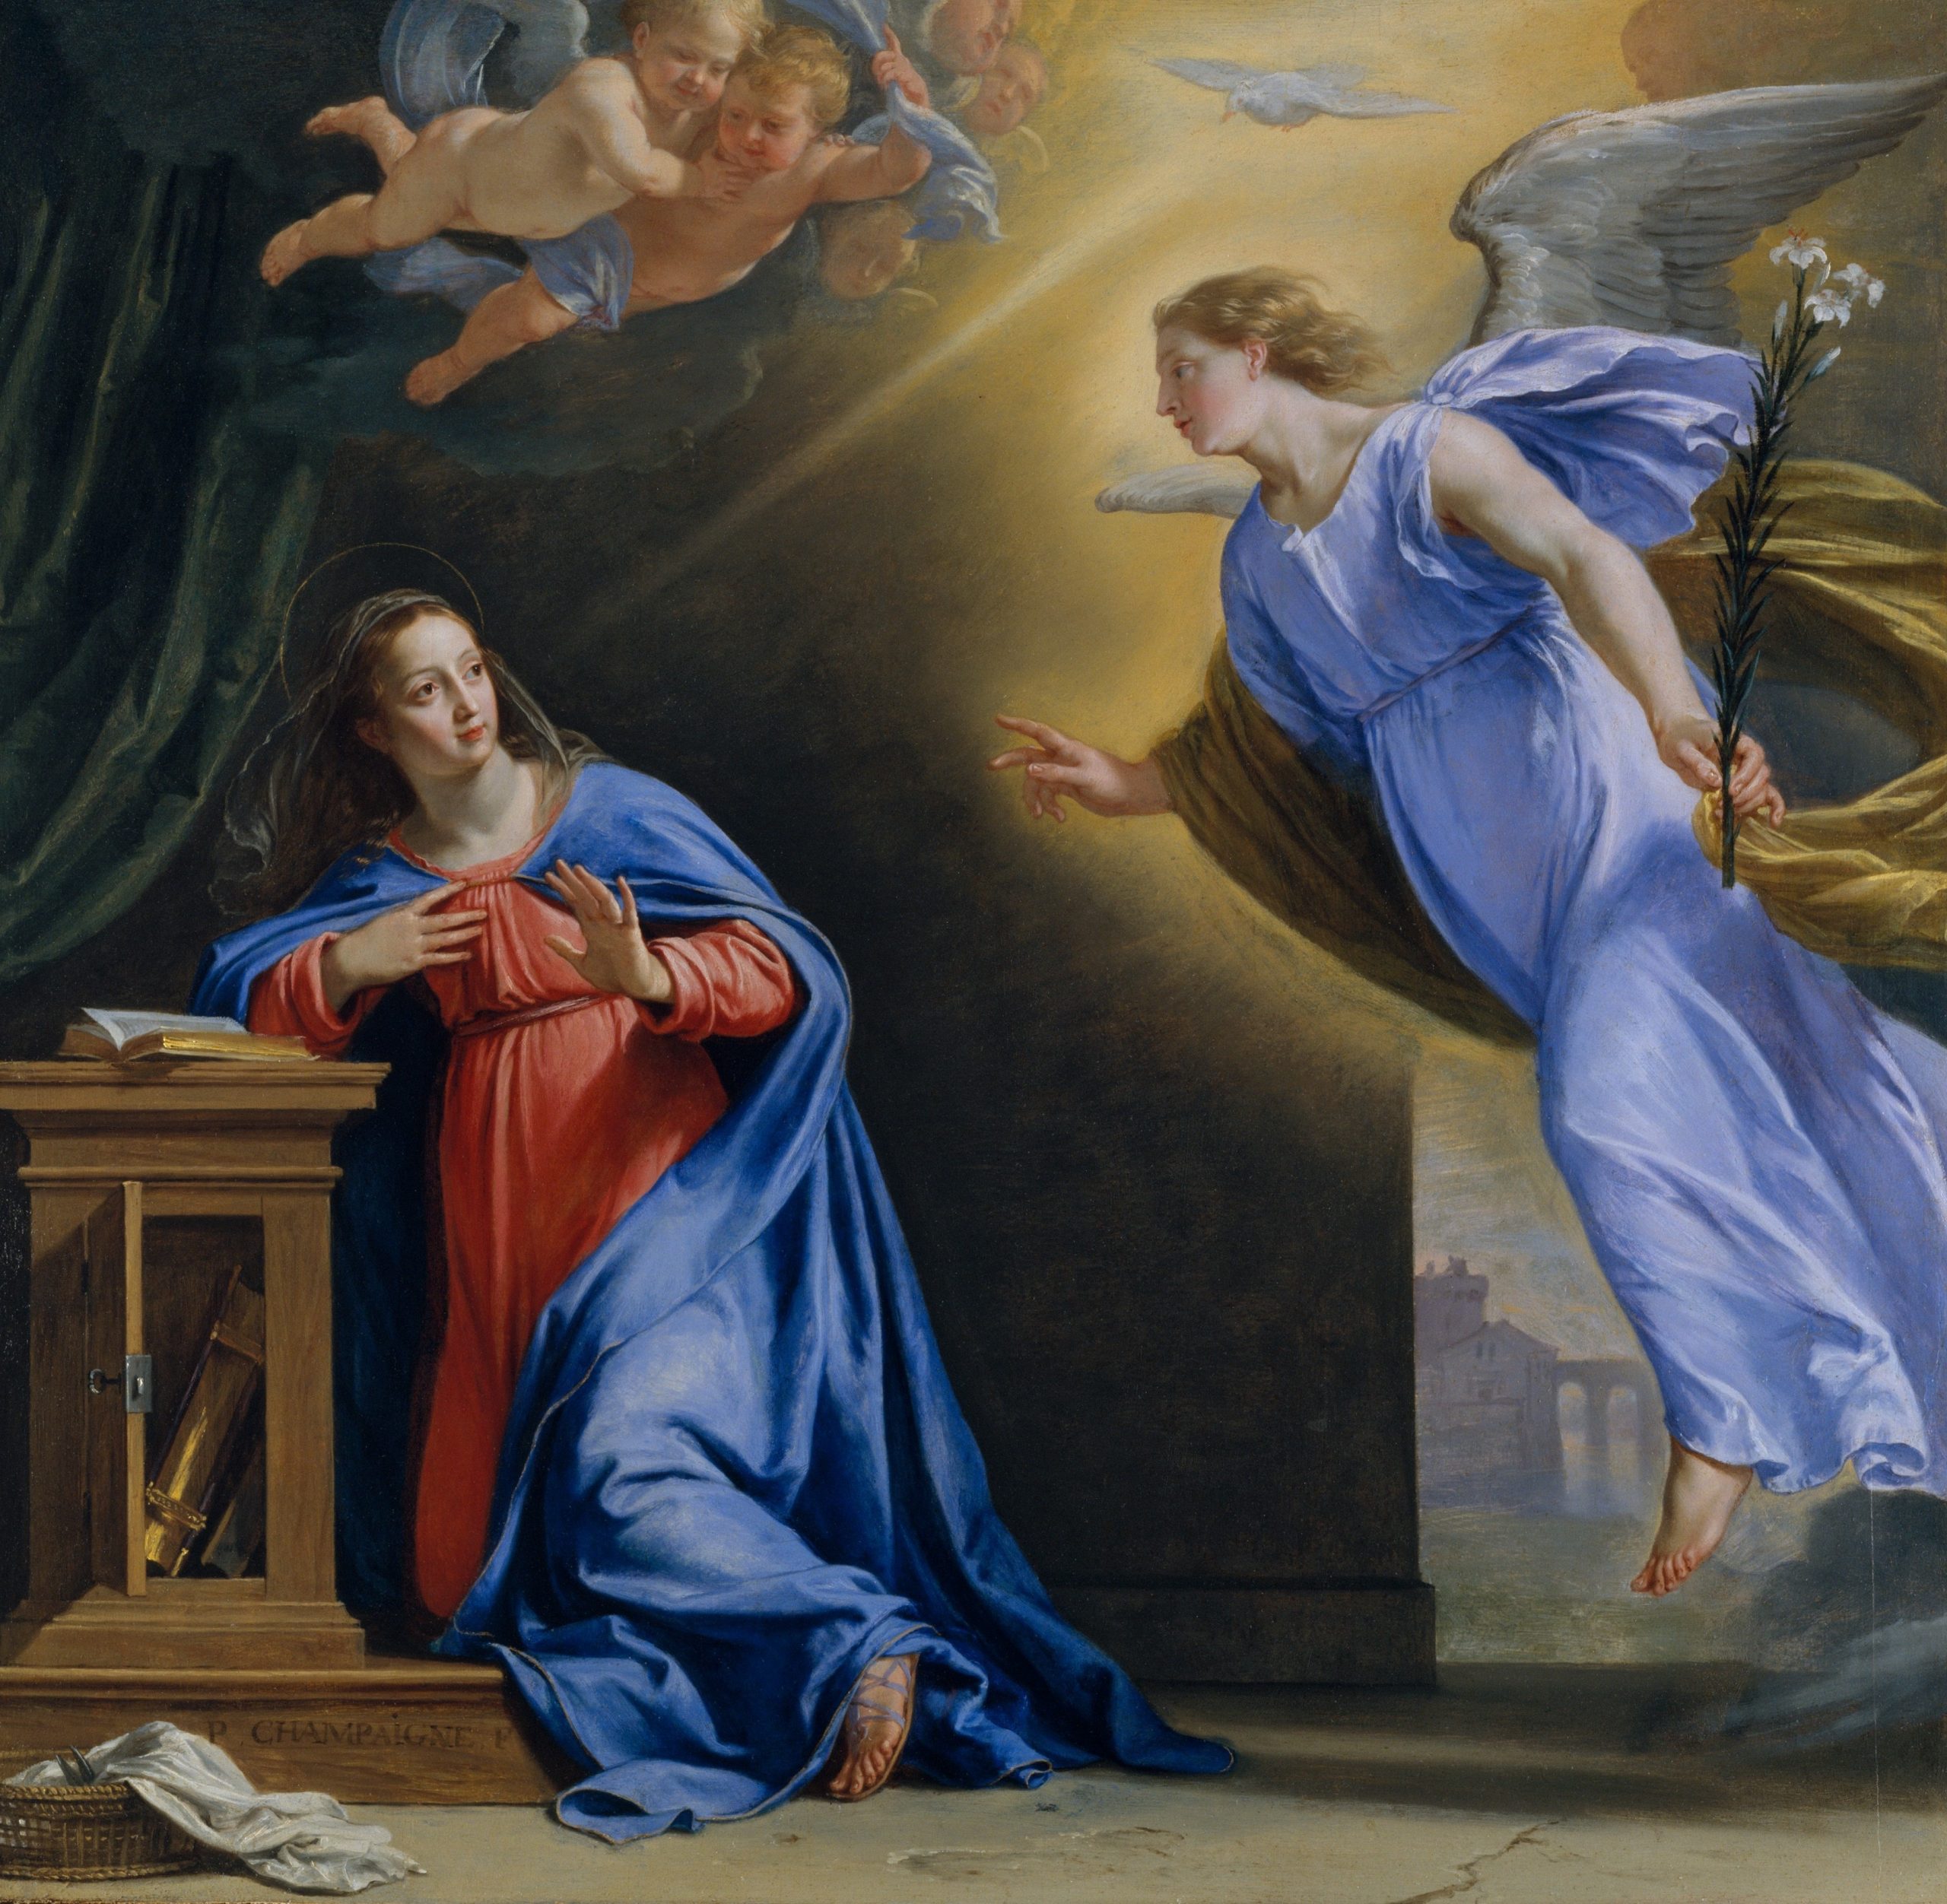 The Feast of the Annunciation and The Hiddenness of God